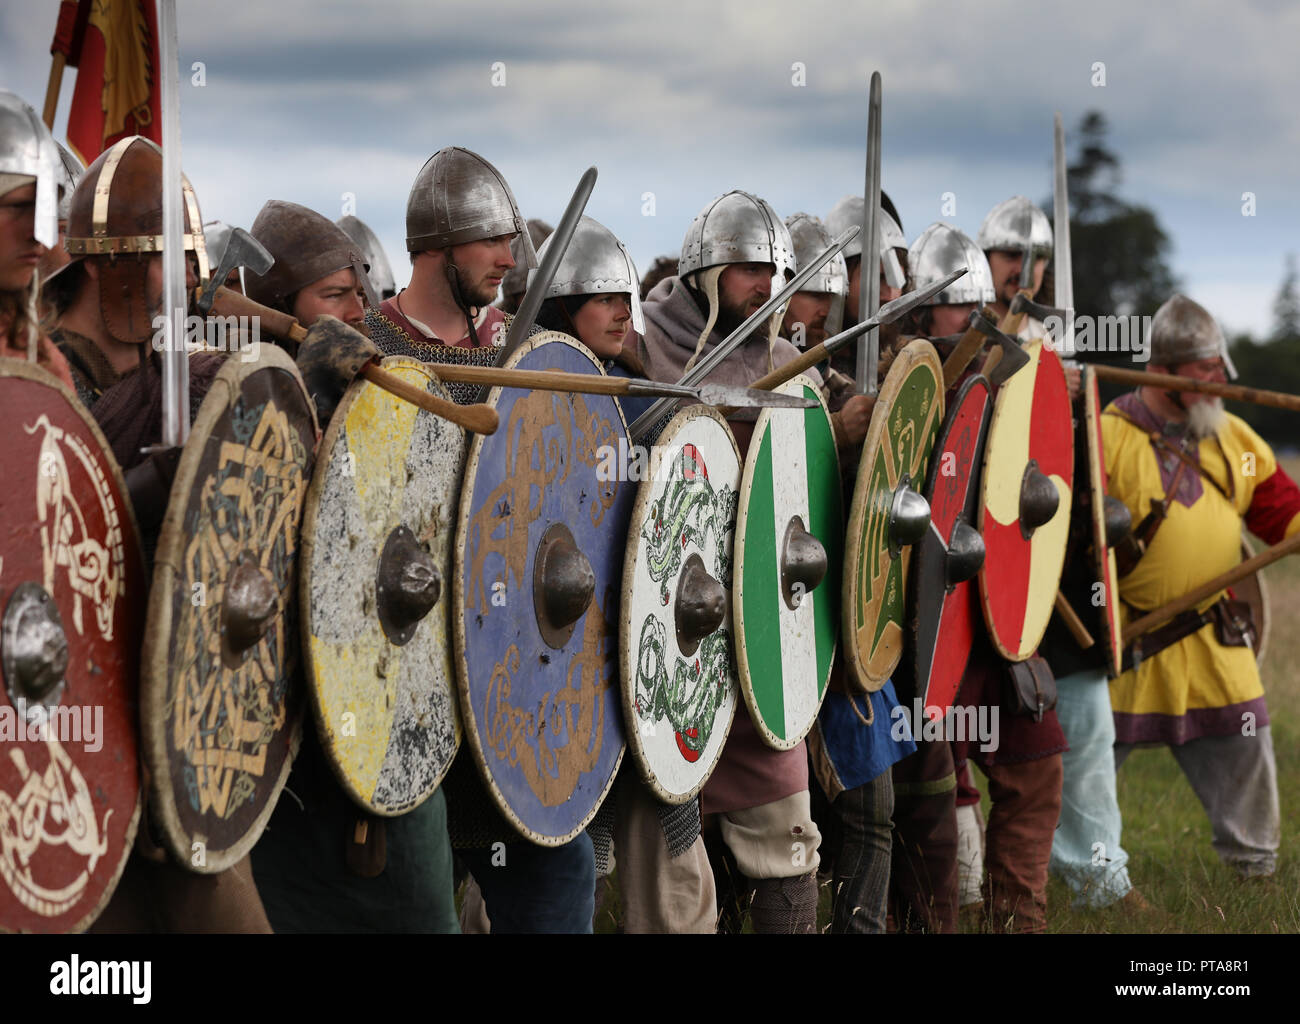 Vikings formed in to a  shield wall Stock Photo